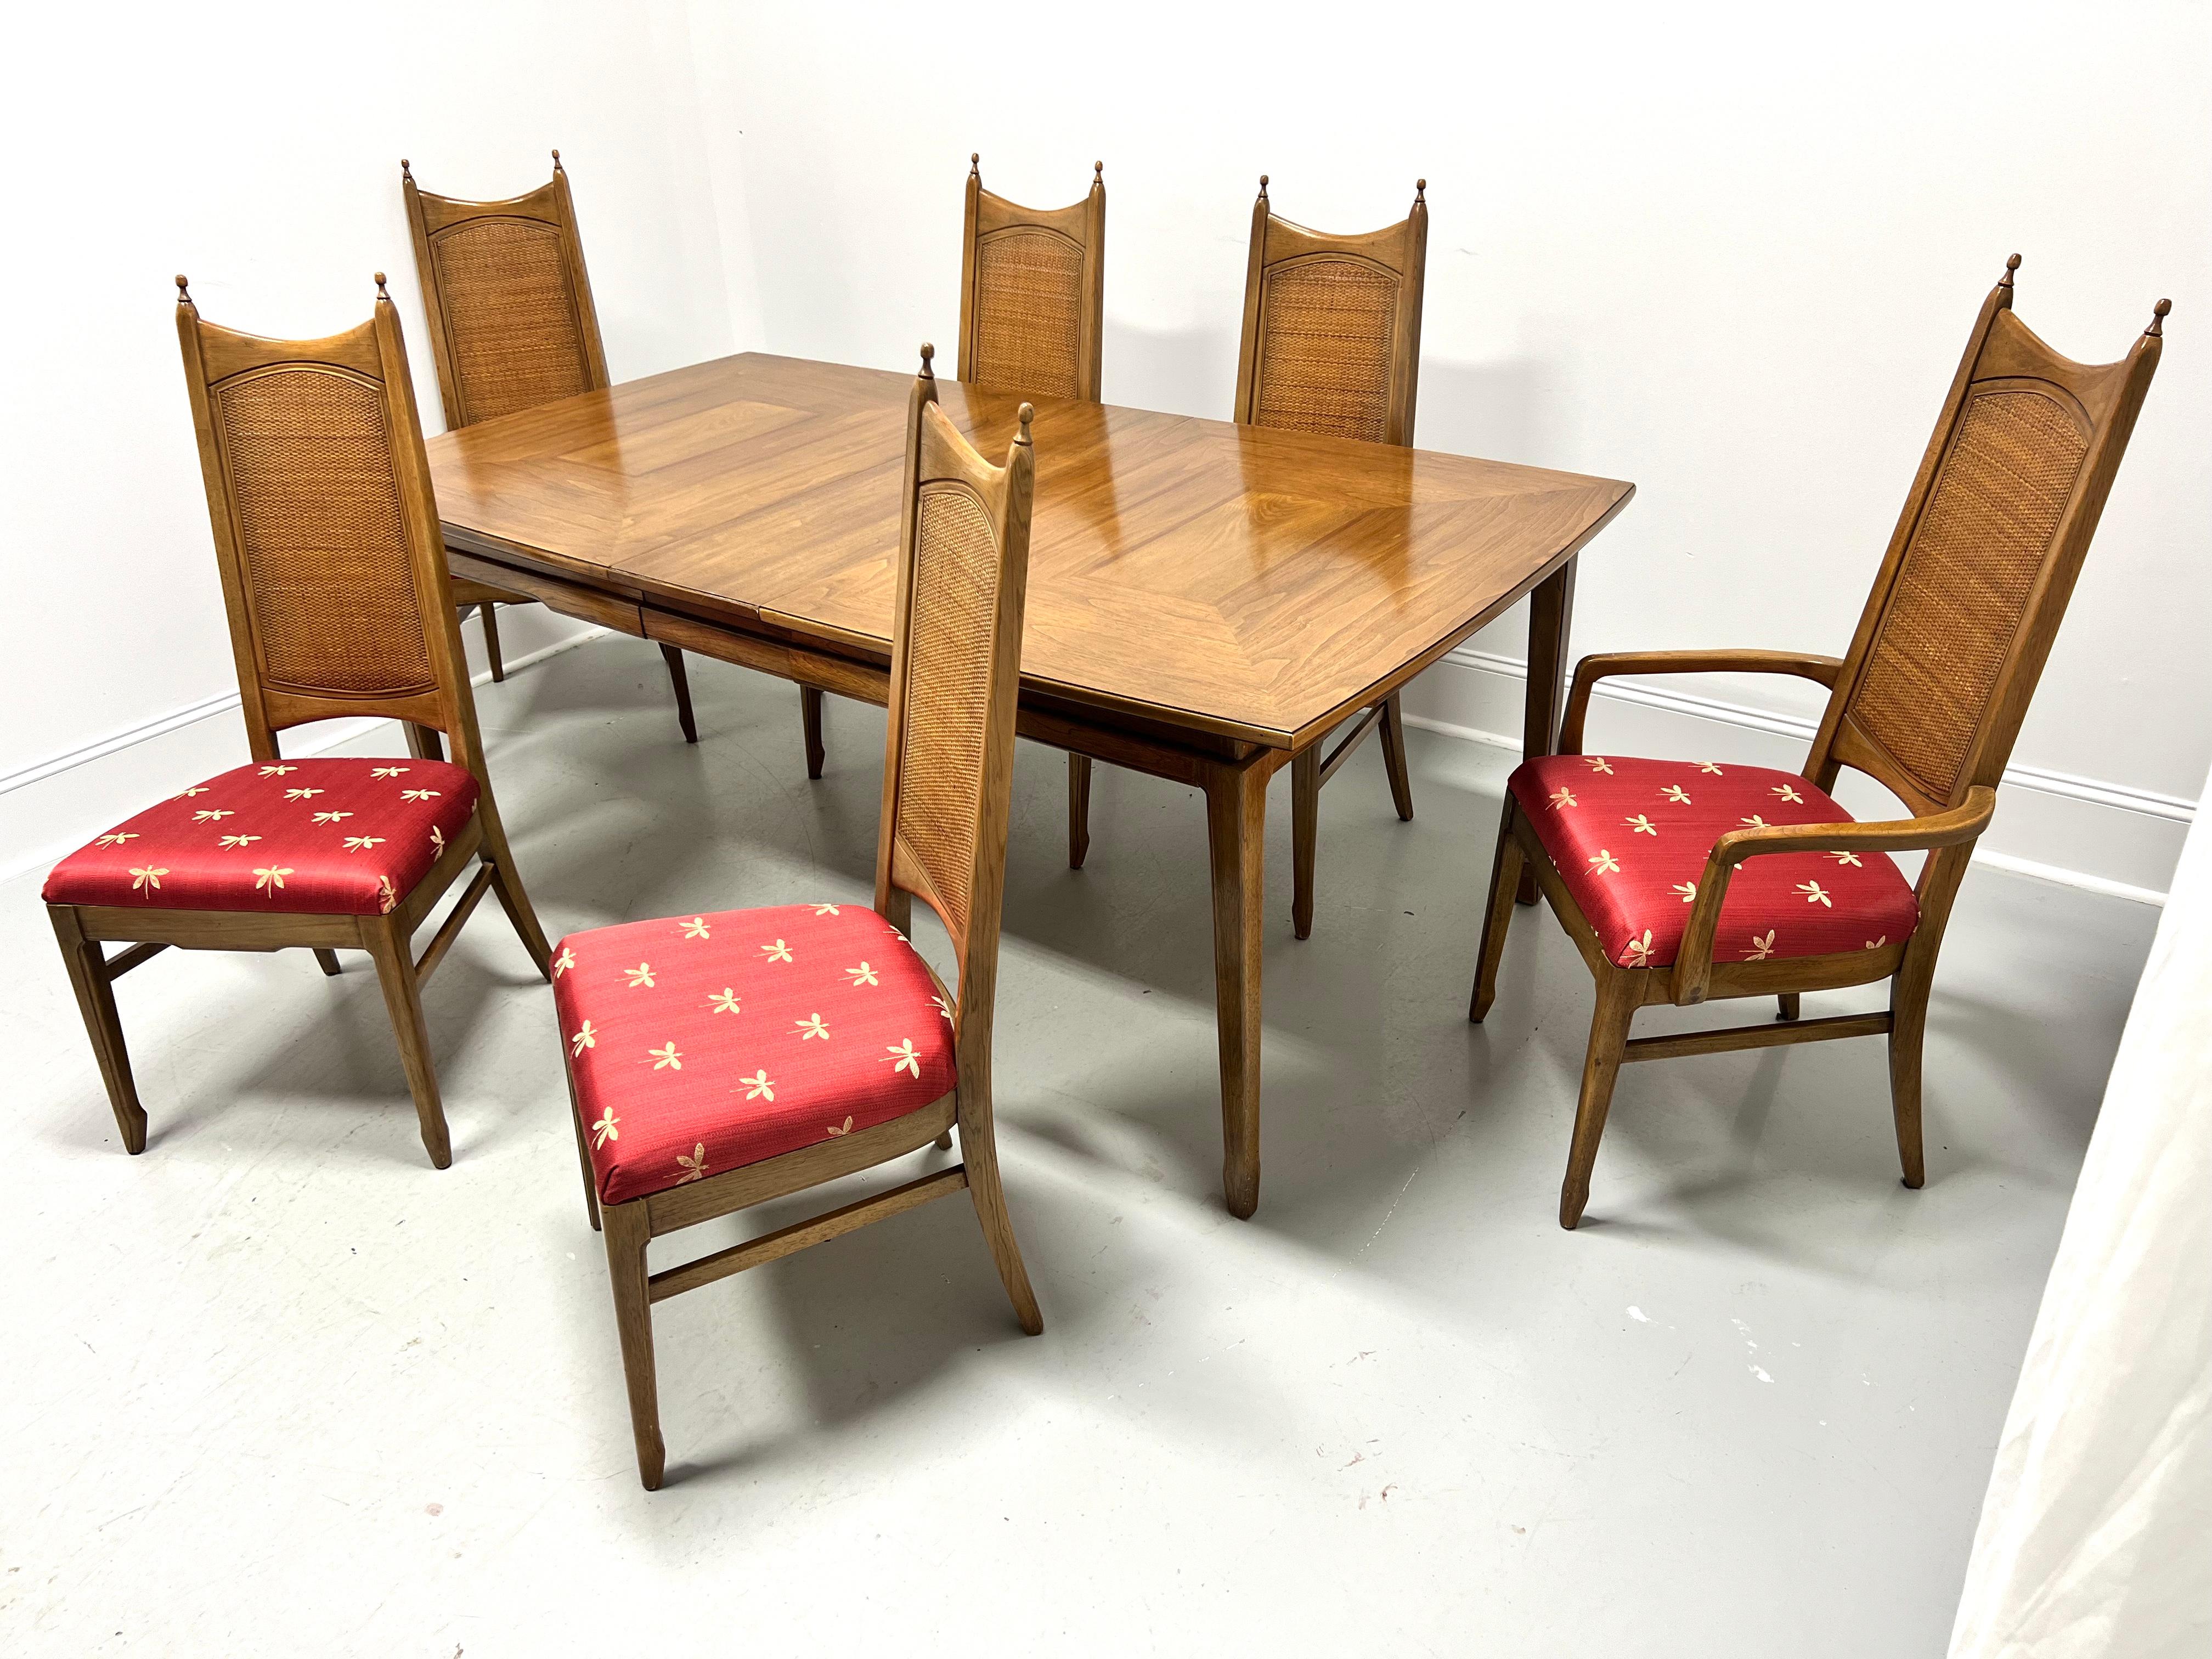 A Mid 20th Century Modern dining set by Thomasville. Made from pecan, or a similar nutwood. Dining table has an inlaid geometric pattern top with a bevel edge, carved apron, tapered straight legs, and spade feet. Includes one 12 inch extension leaf